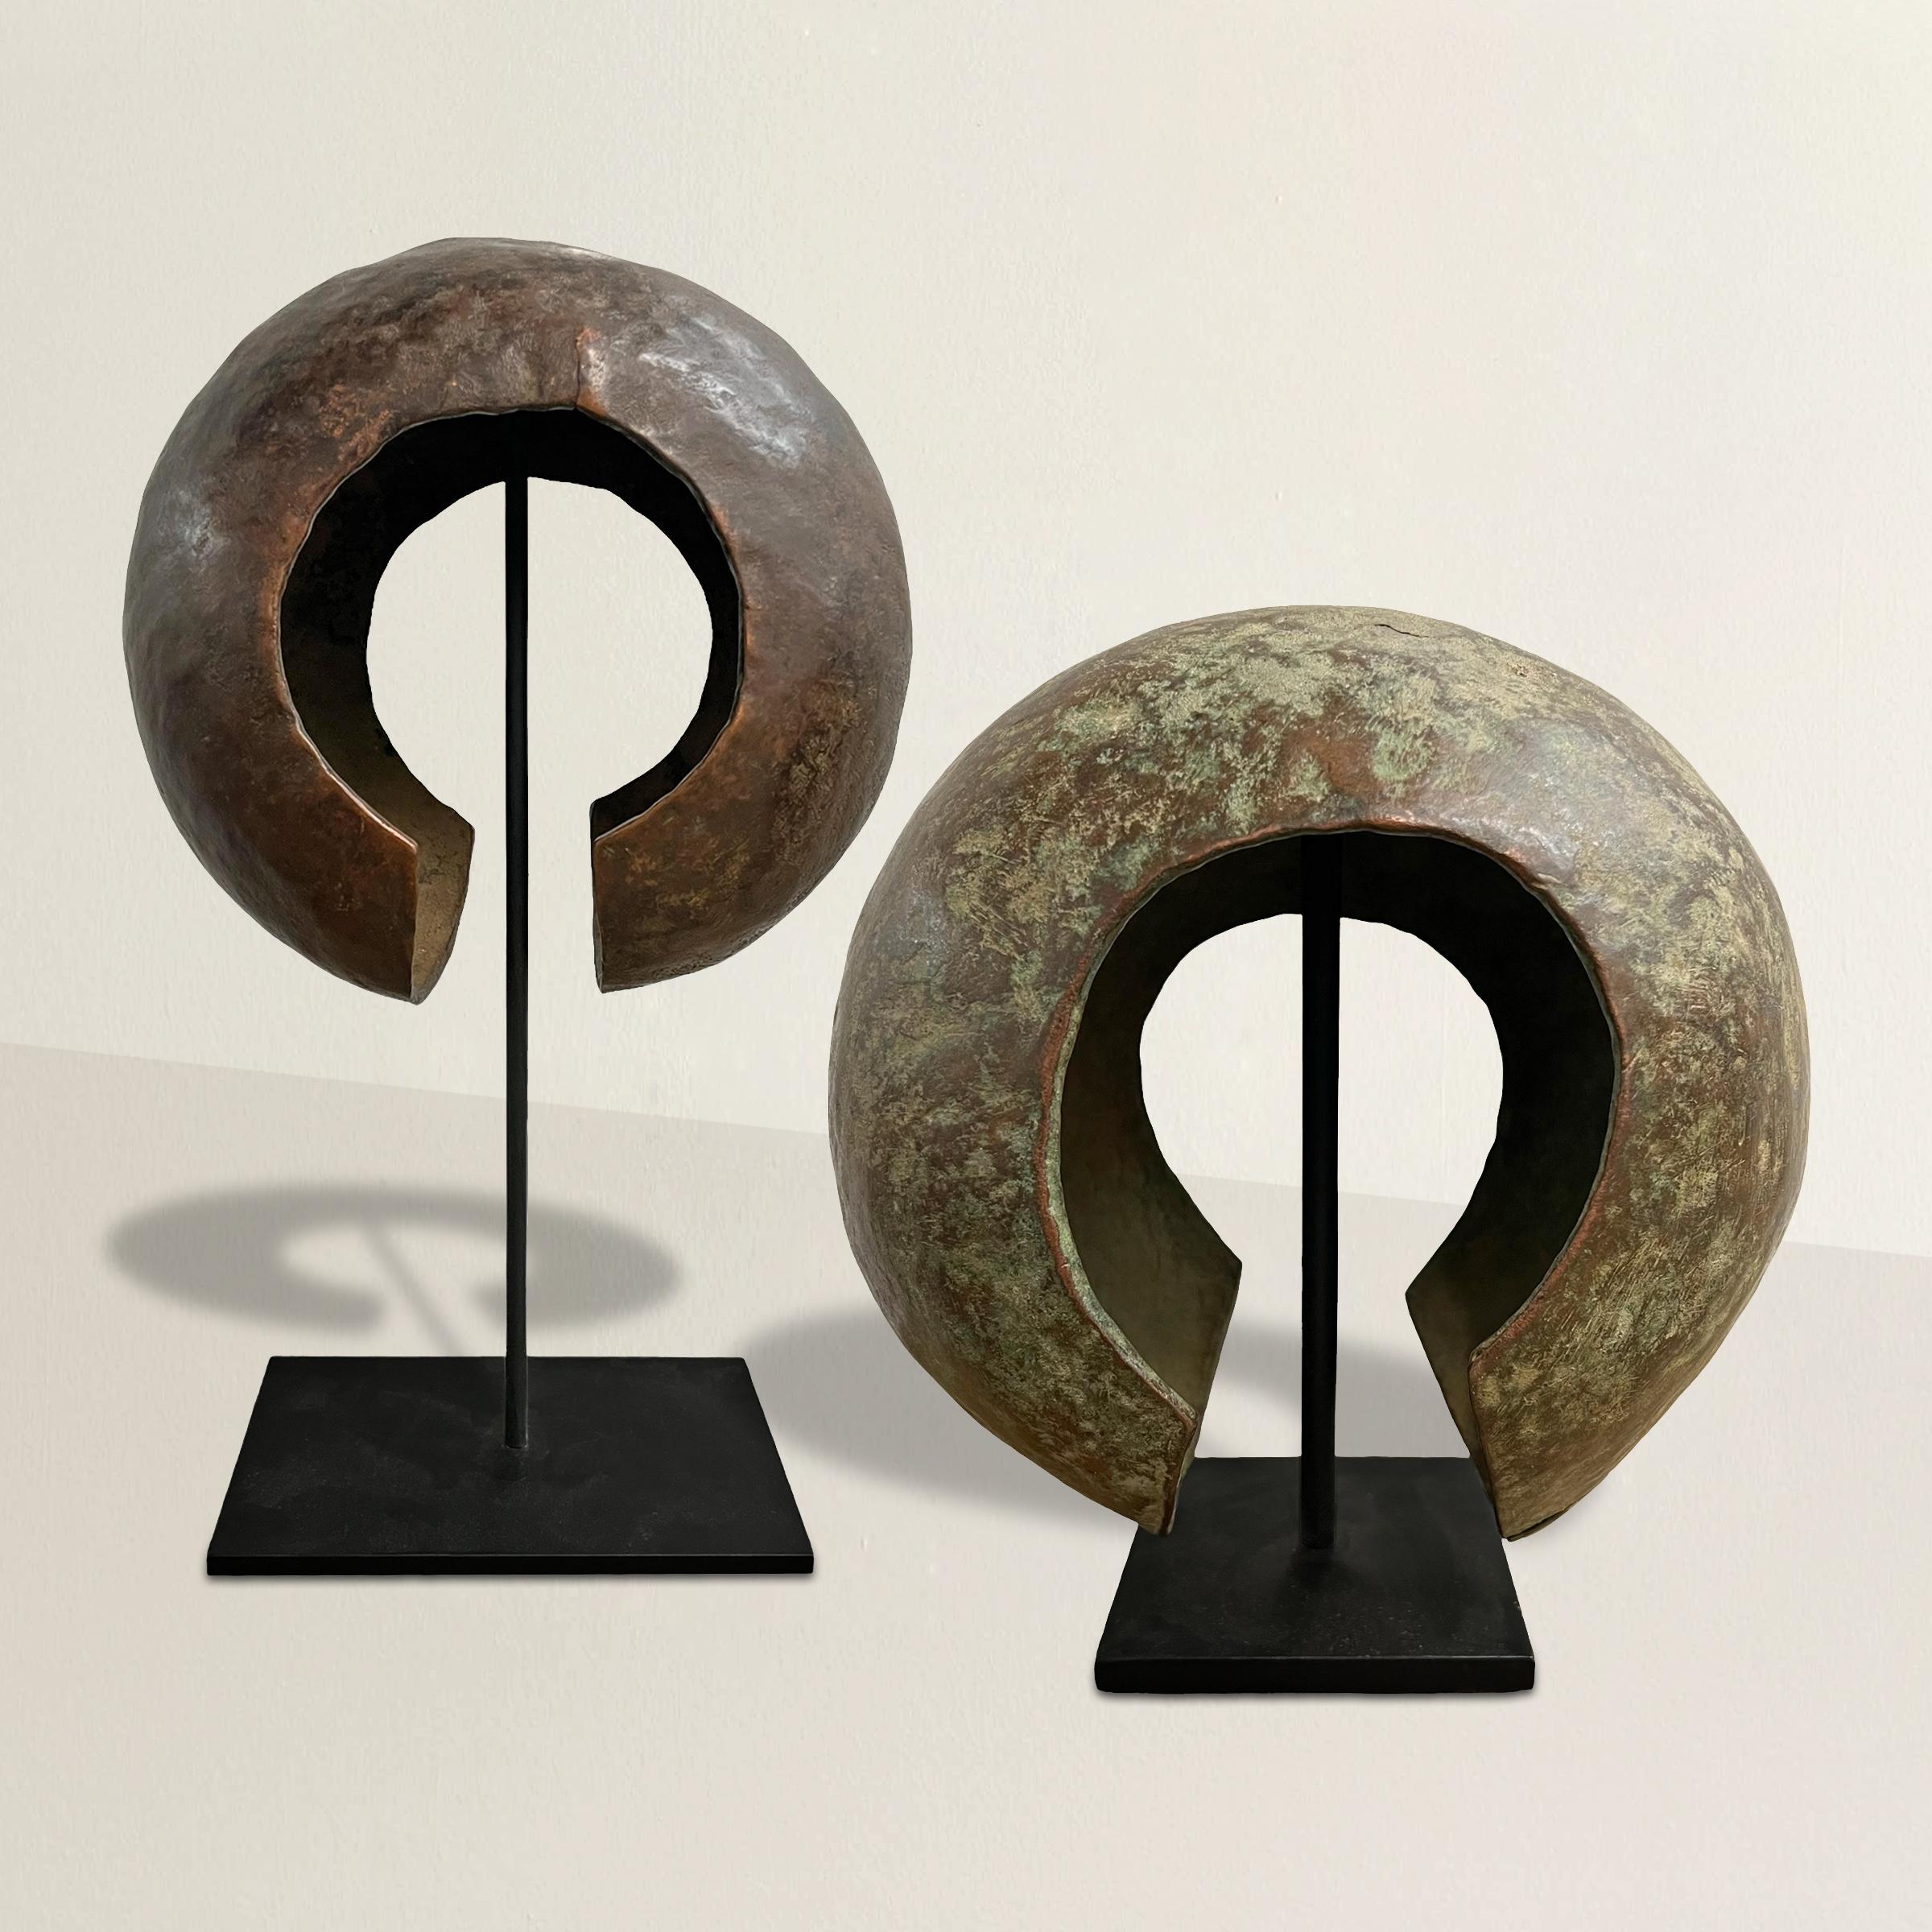 Immerse yourself in the rich cultural of the Mbole people of the Democratic Republic of the Congo with this exquisite pair of 20th-century Mbole copper currency cuffs. Mounted on custom steel stands, these cuffs bear witness to a tradition steeped